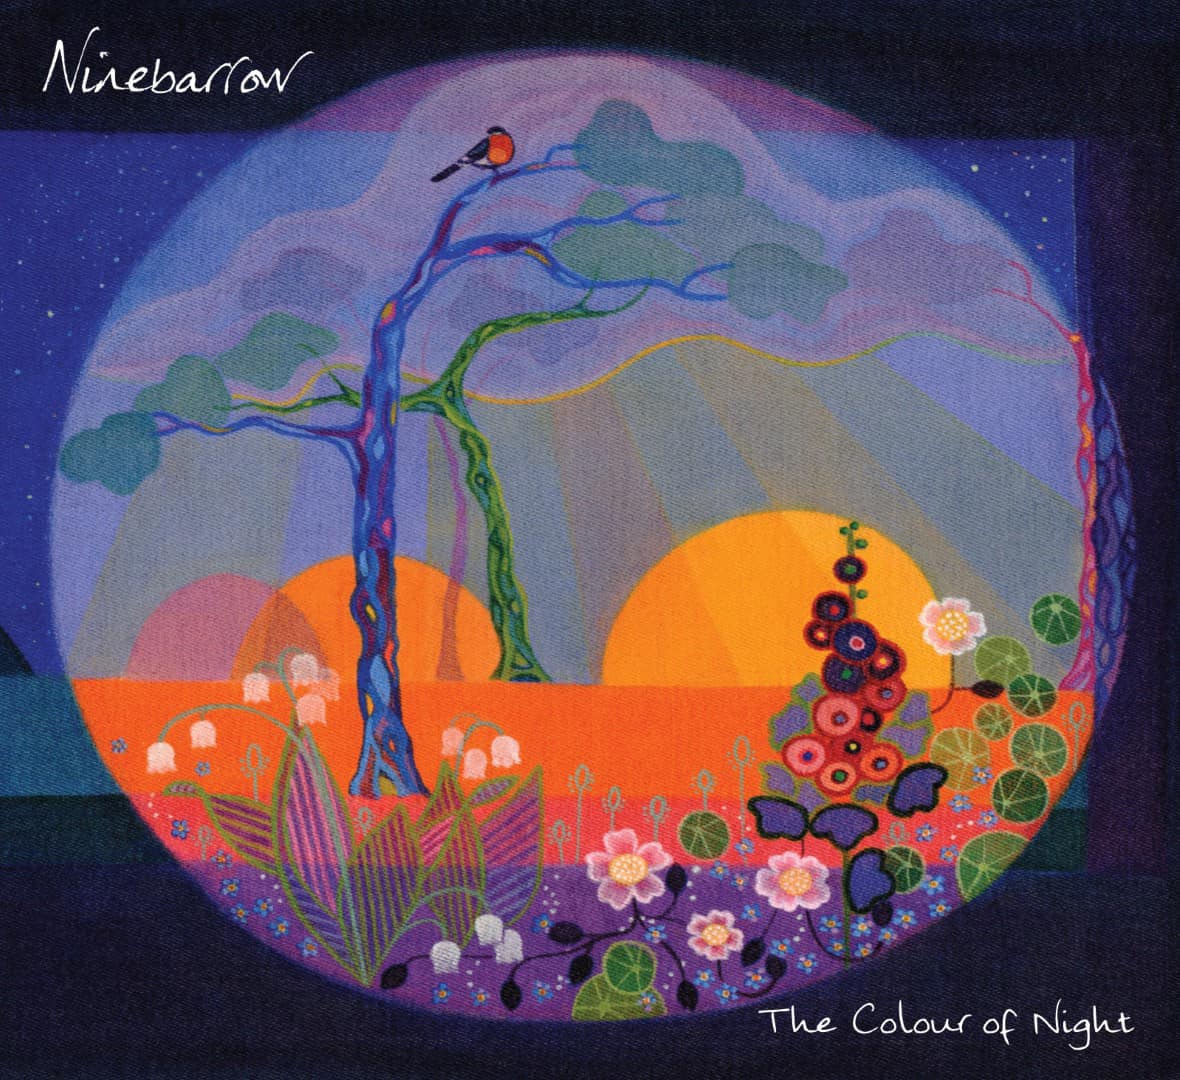 WorldBeat this eve from 7-9pm on #GWSRadio with our album of the week The Colour of Night by @Ninebarrow + music with @DuttyMoonshine @Fishy_Friends @AzizaBrahim1 #SetFeux #Lina_ @ziontrainindub @harrimason